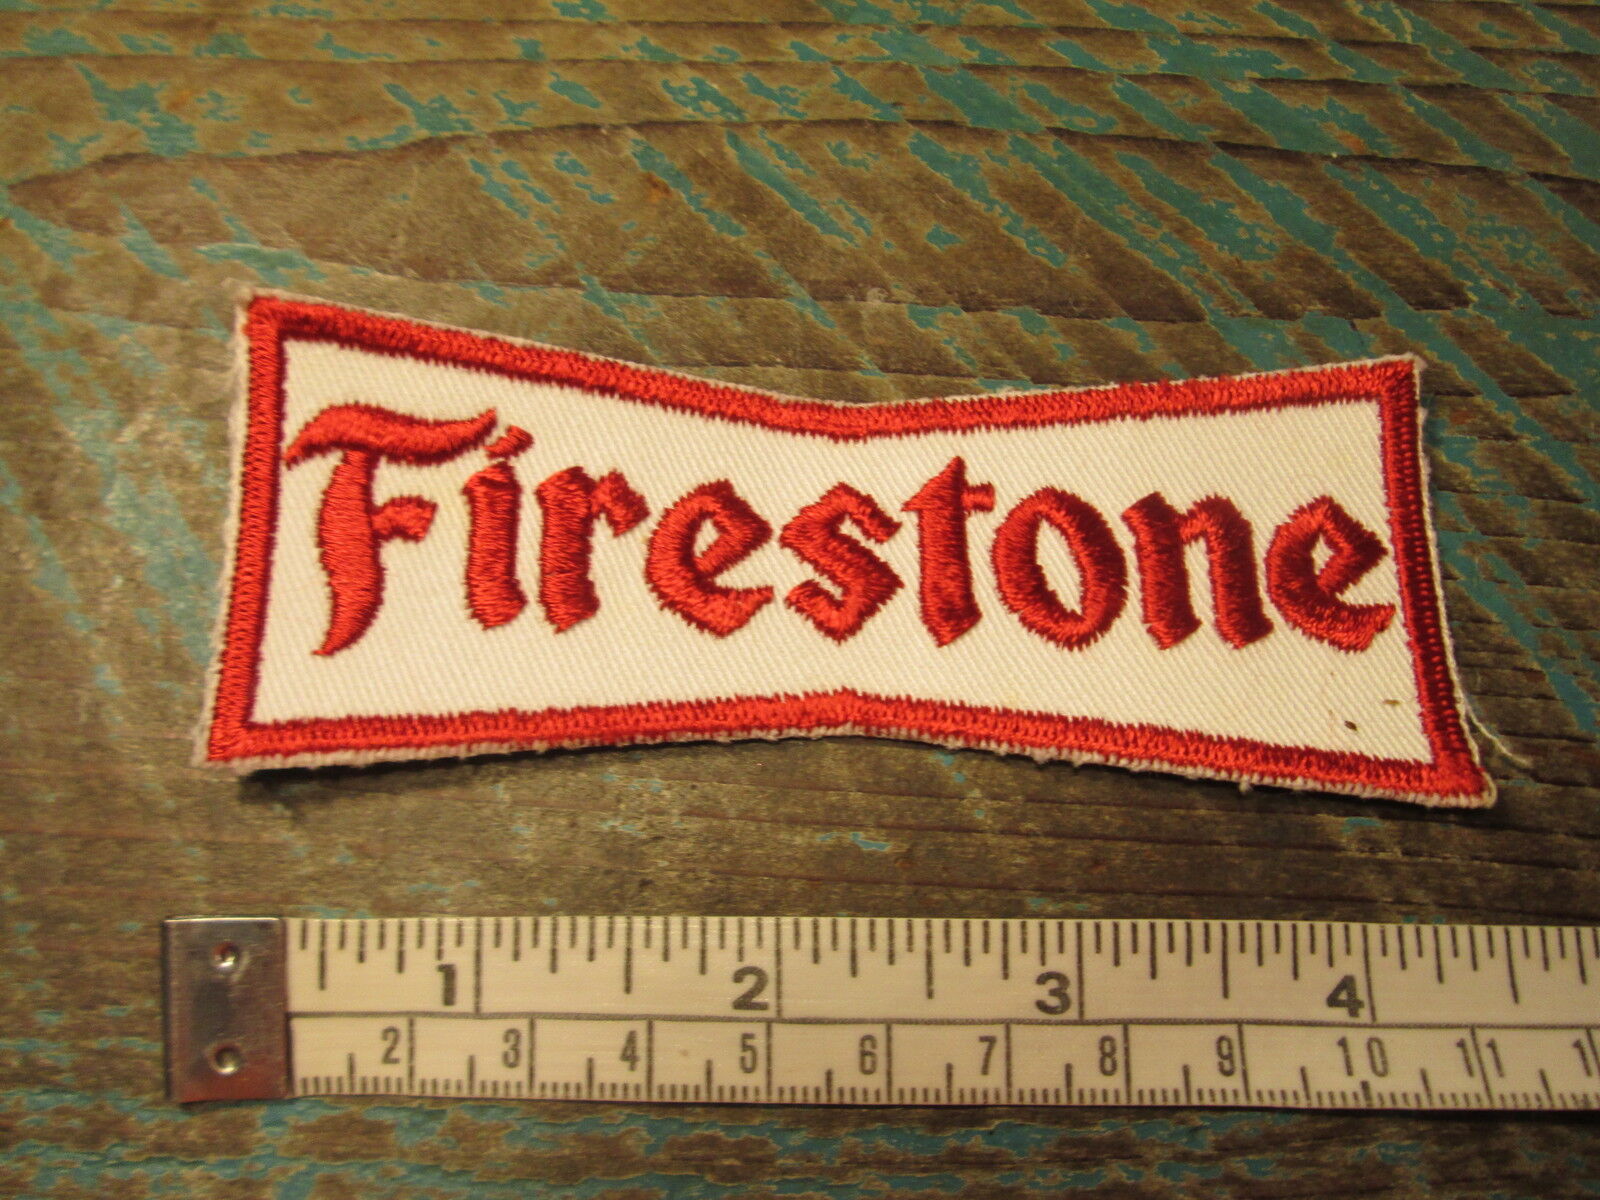 VINTAGE STYLE FIRESTONE RUBBER COMPANY RACING PATCH TIRE ALMS SCCA F1 CAN AM GT